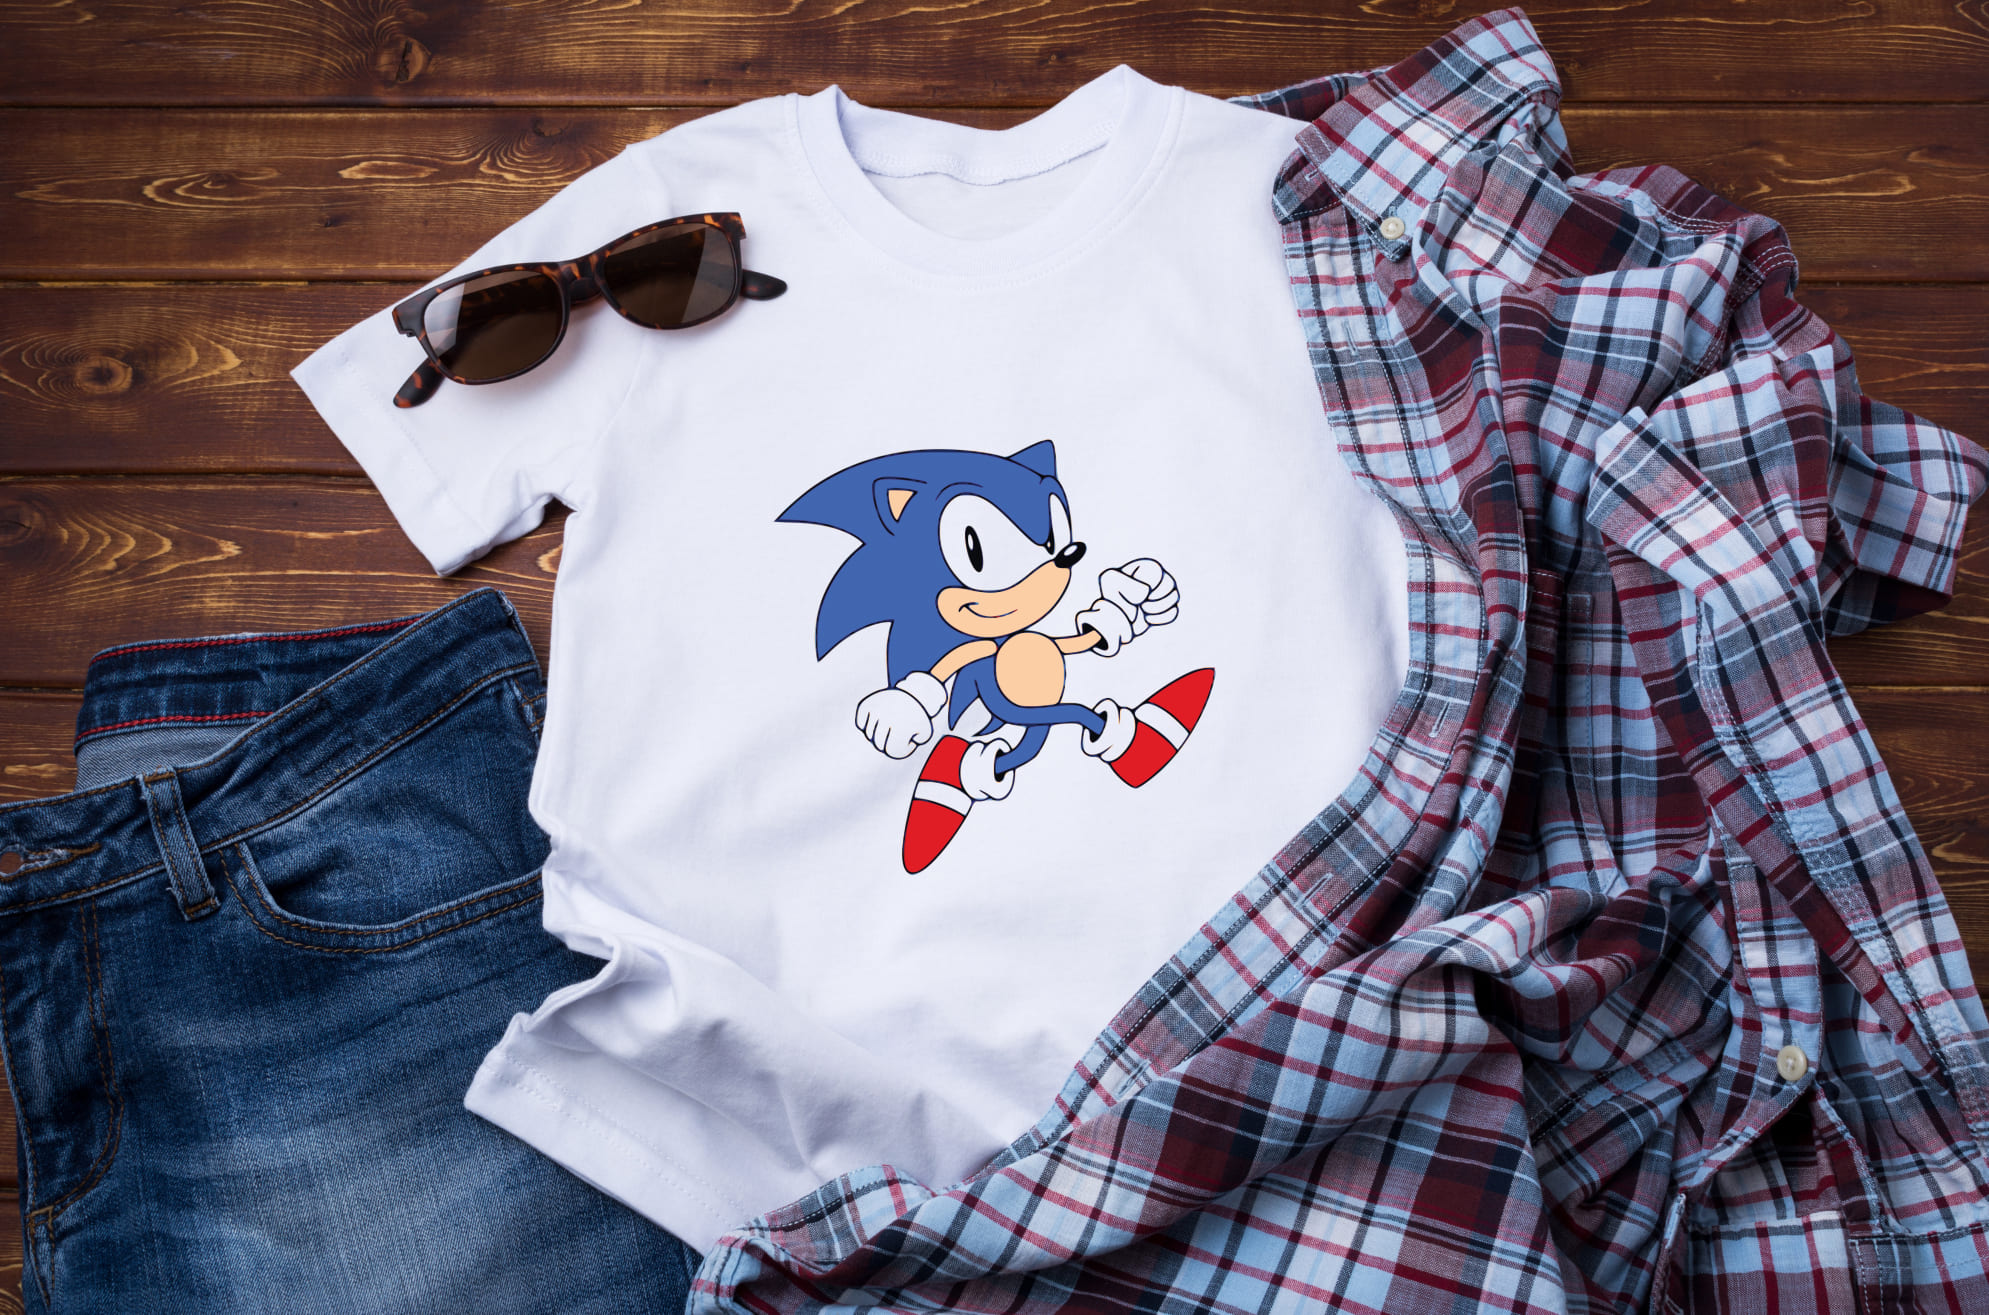 Active Sonic on the white t-shirt.